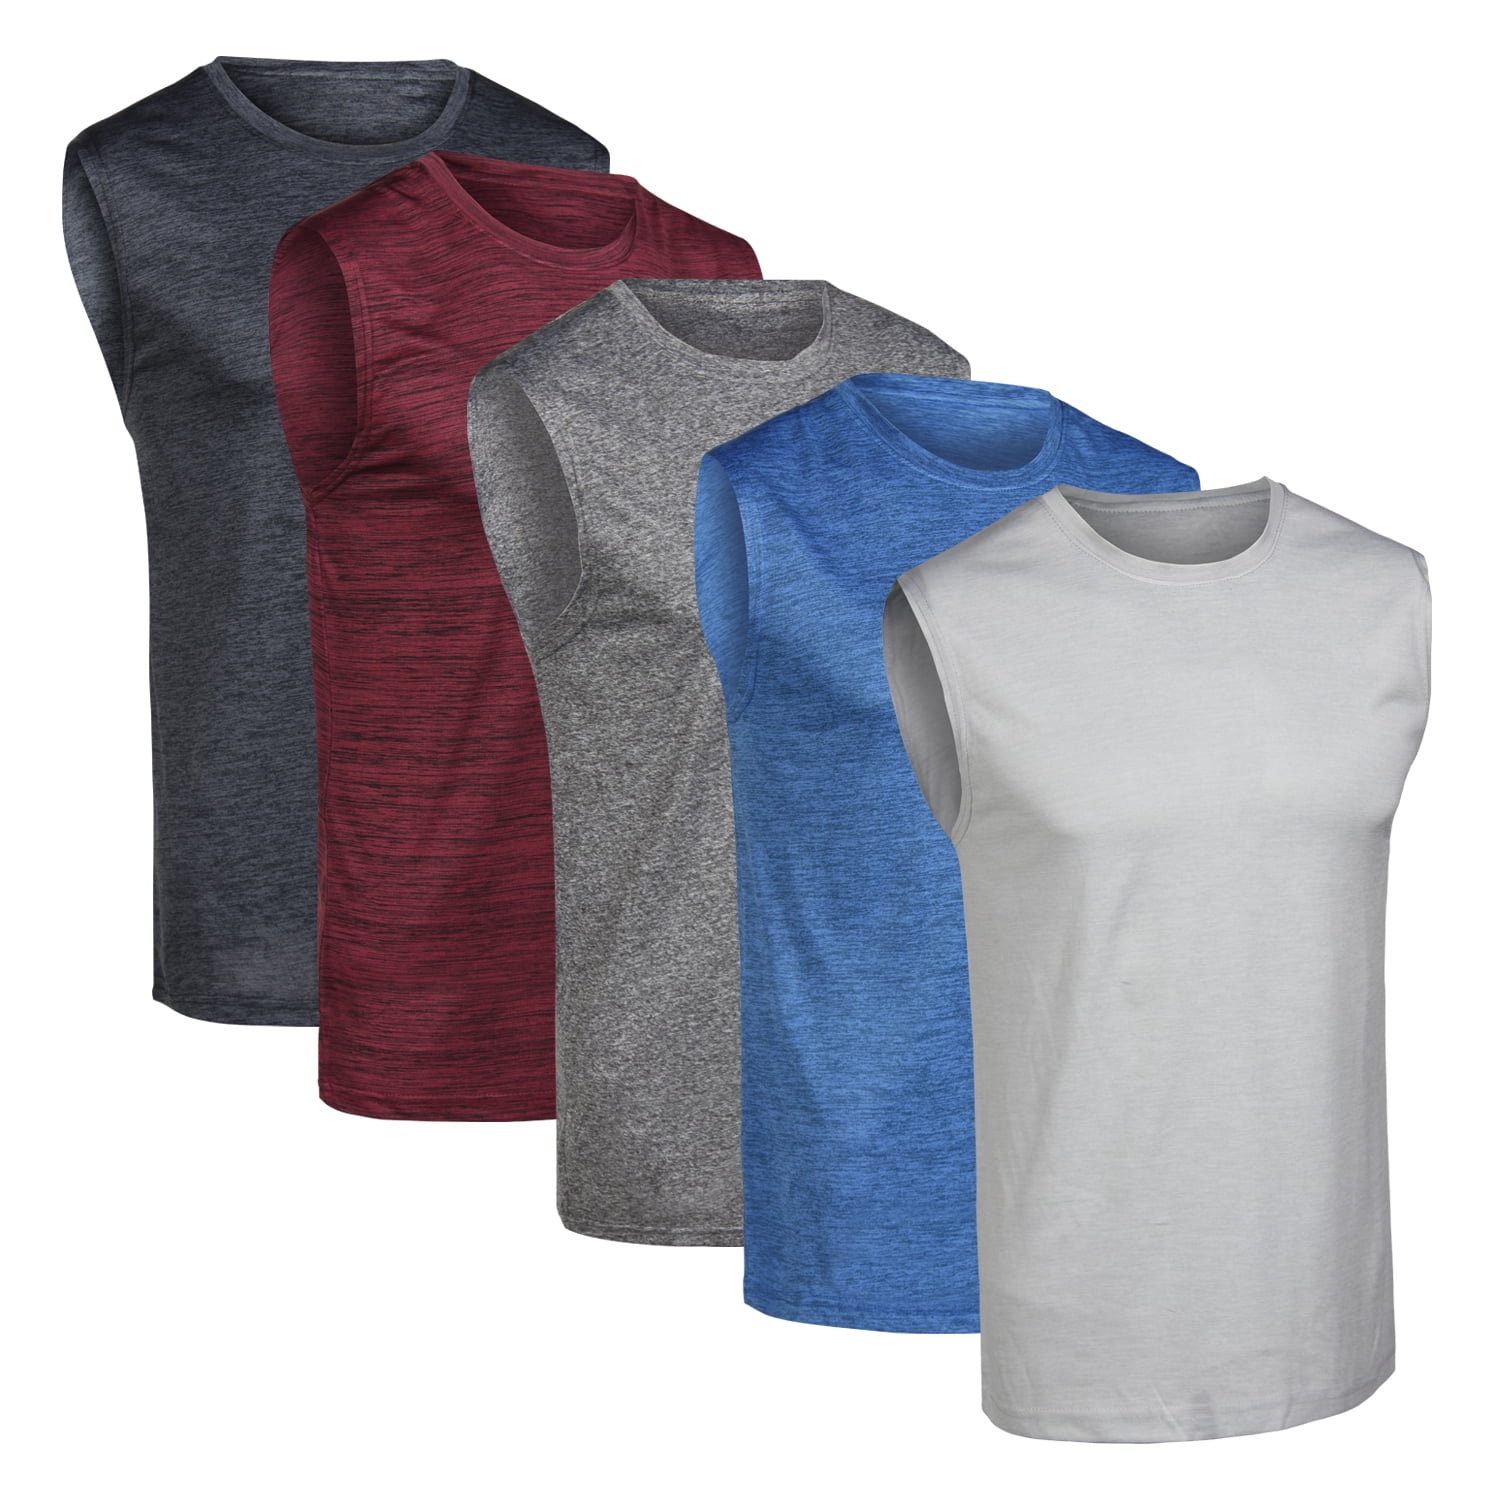 S-5XLT 3 & 5 Pack Men's Dry-Fit Active Athletic Tech Tank Top Regular and Big & Tall Sizes 